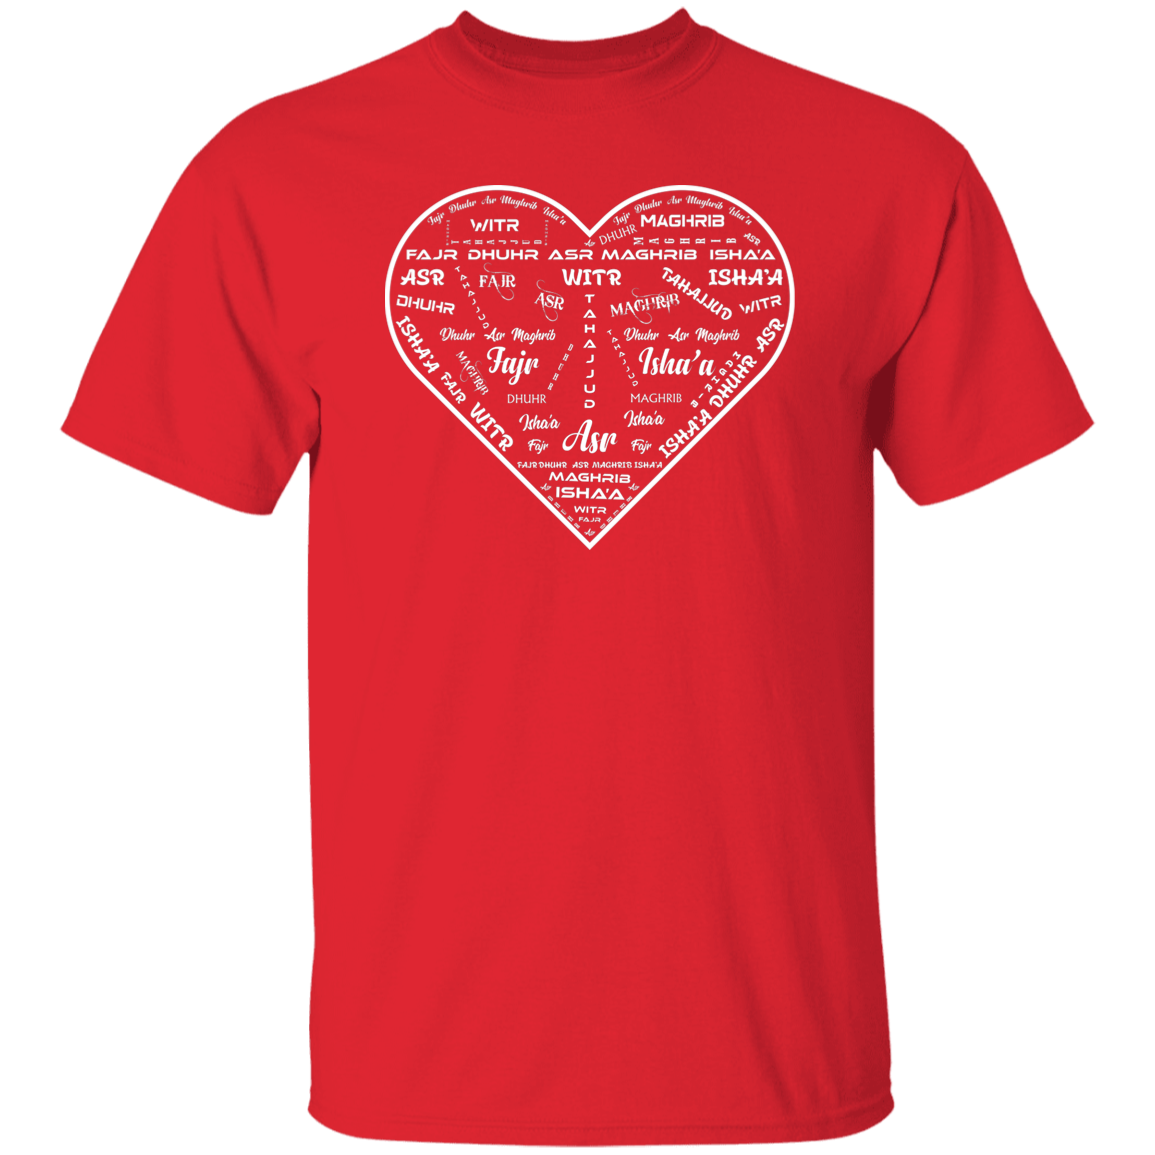 PRAYERS IN A HEART LOGO  T-Shirt (MORE COLOR OPTIONS)